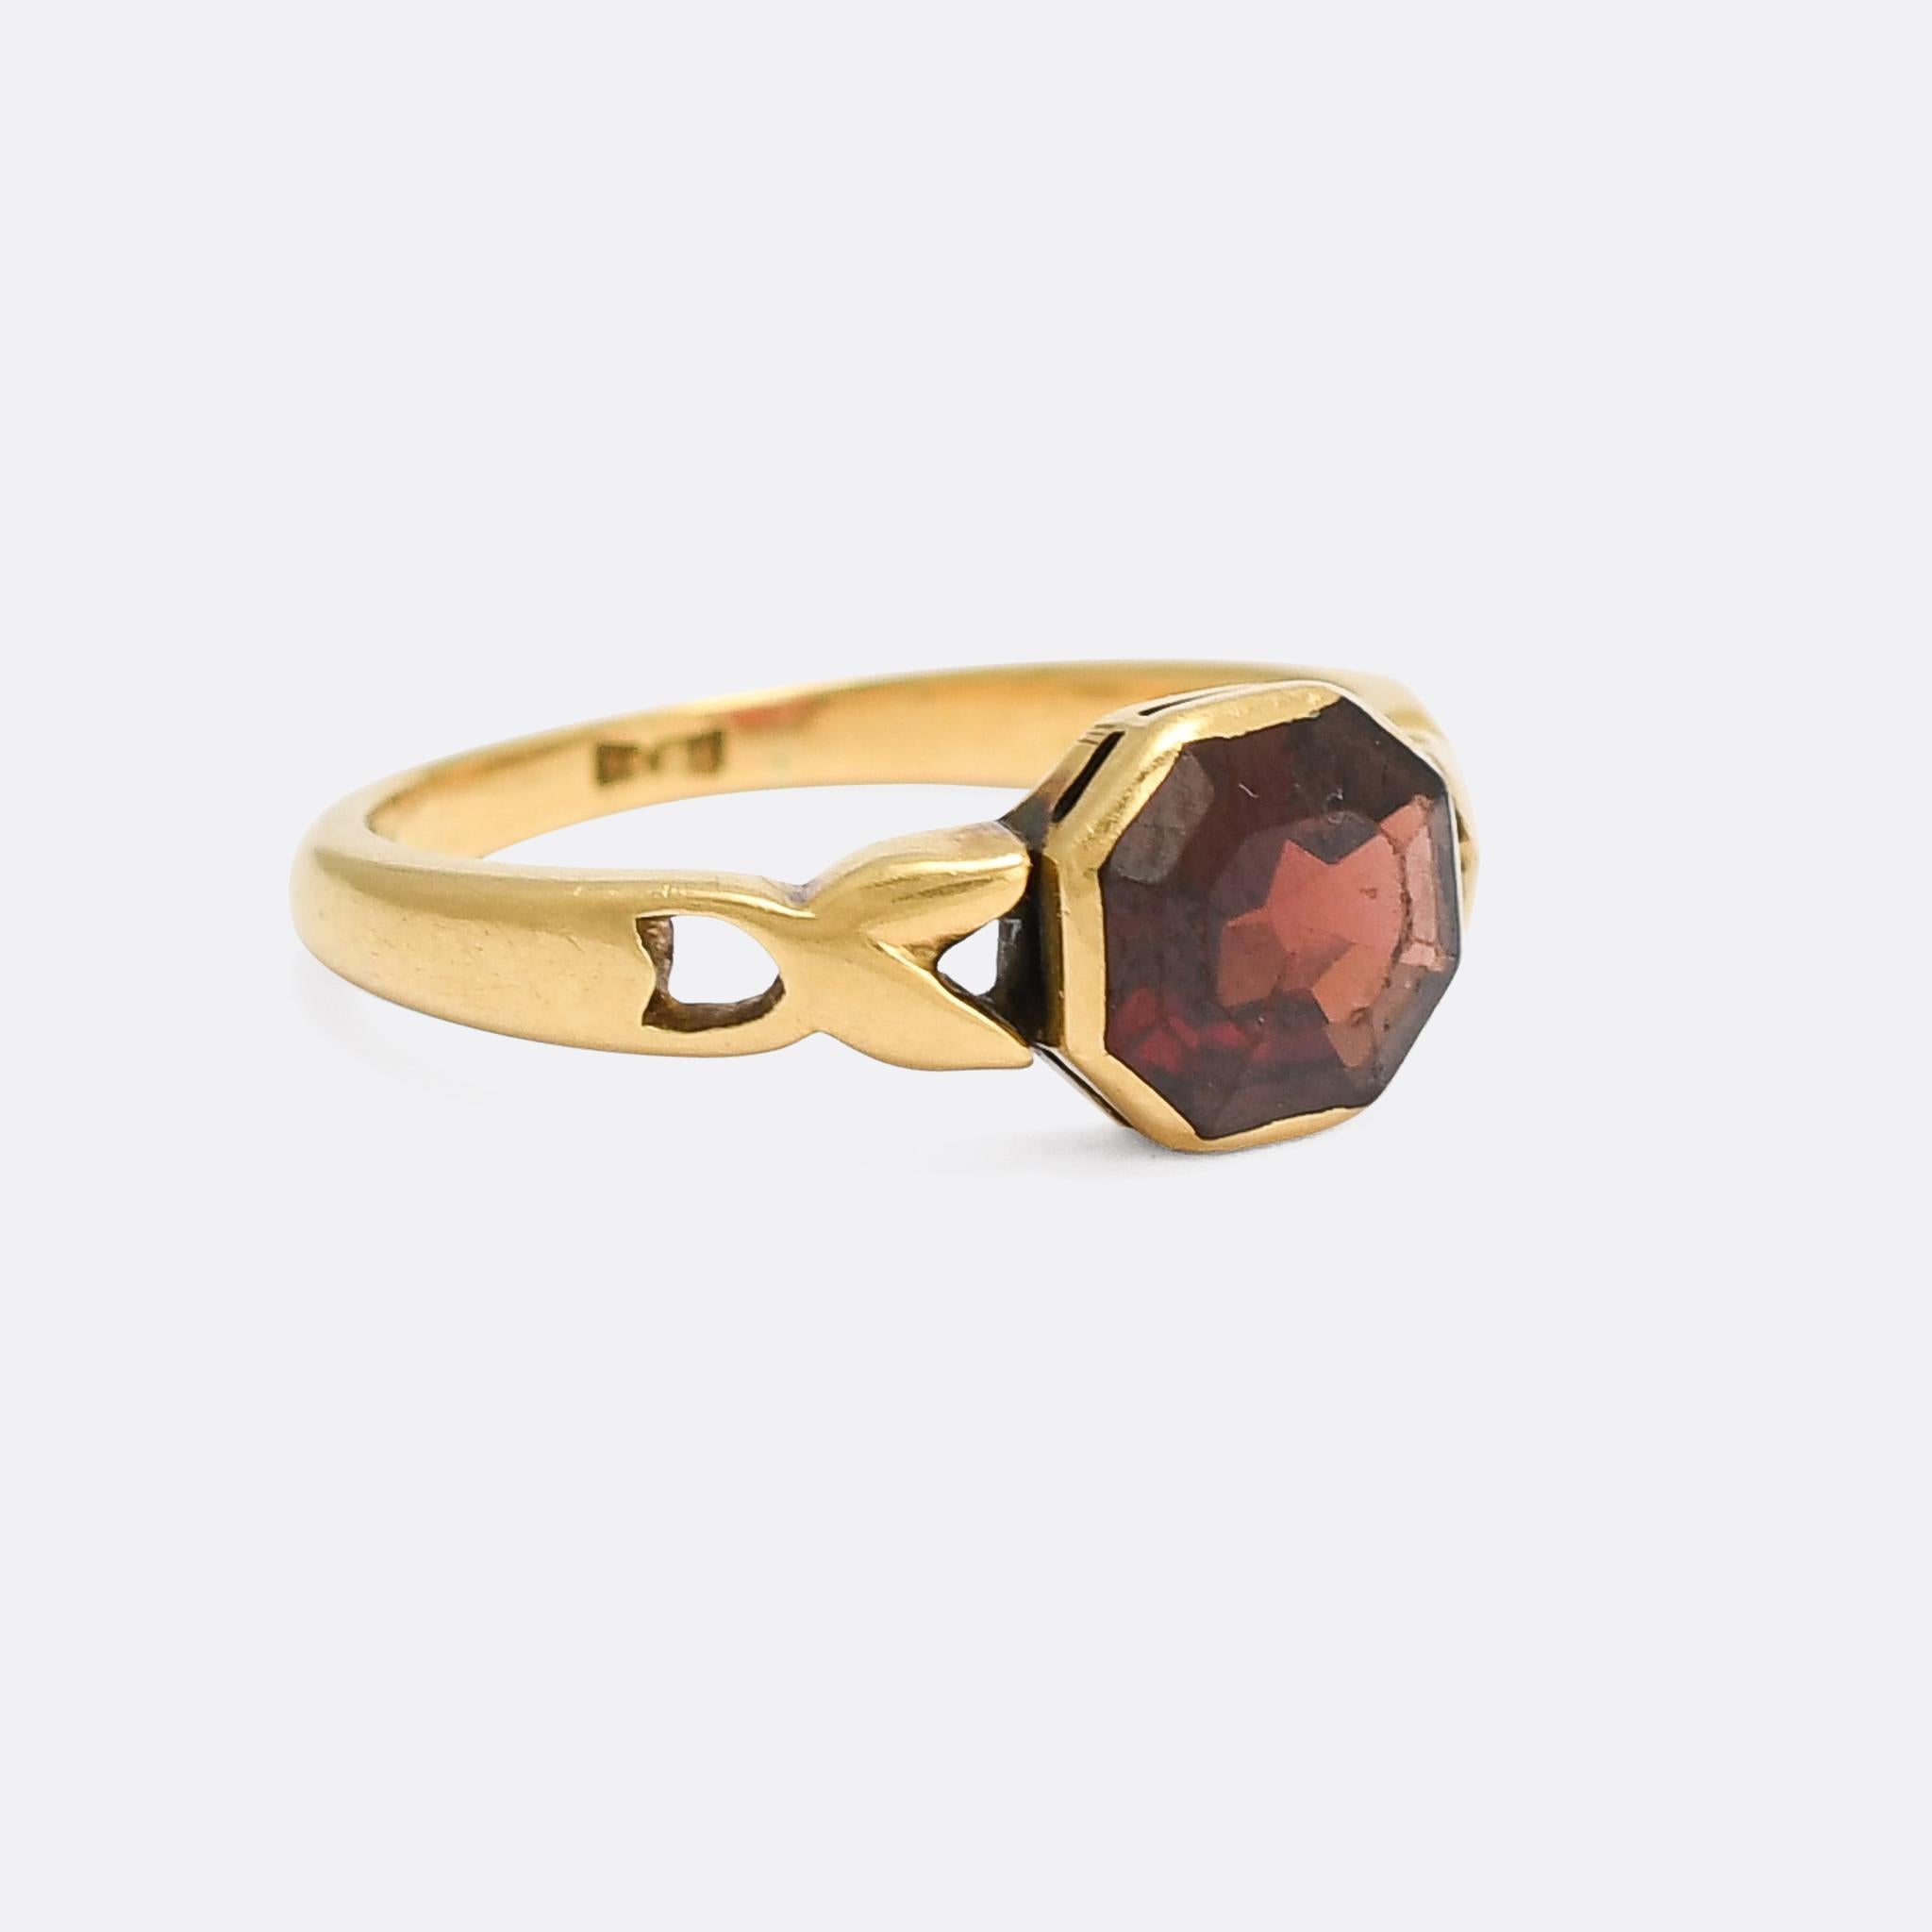 An unusual and alluring antique garnet ring dating from the late Victorian period, circa 1890. The stone is an octagonal faceted pyrope garnet, a particularly bright blood-red example, collet set in an 18 karat gold ring mount. The band features